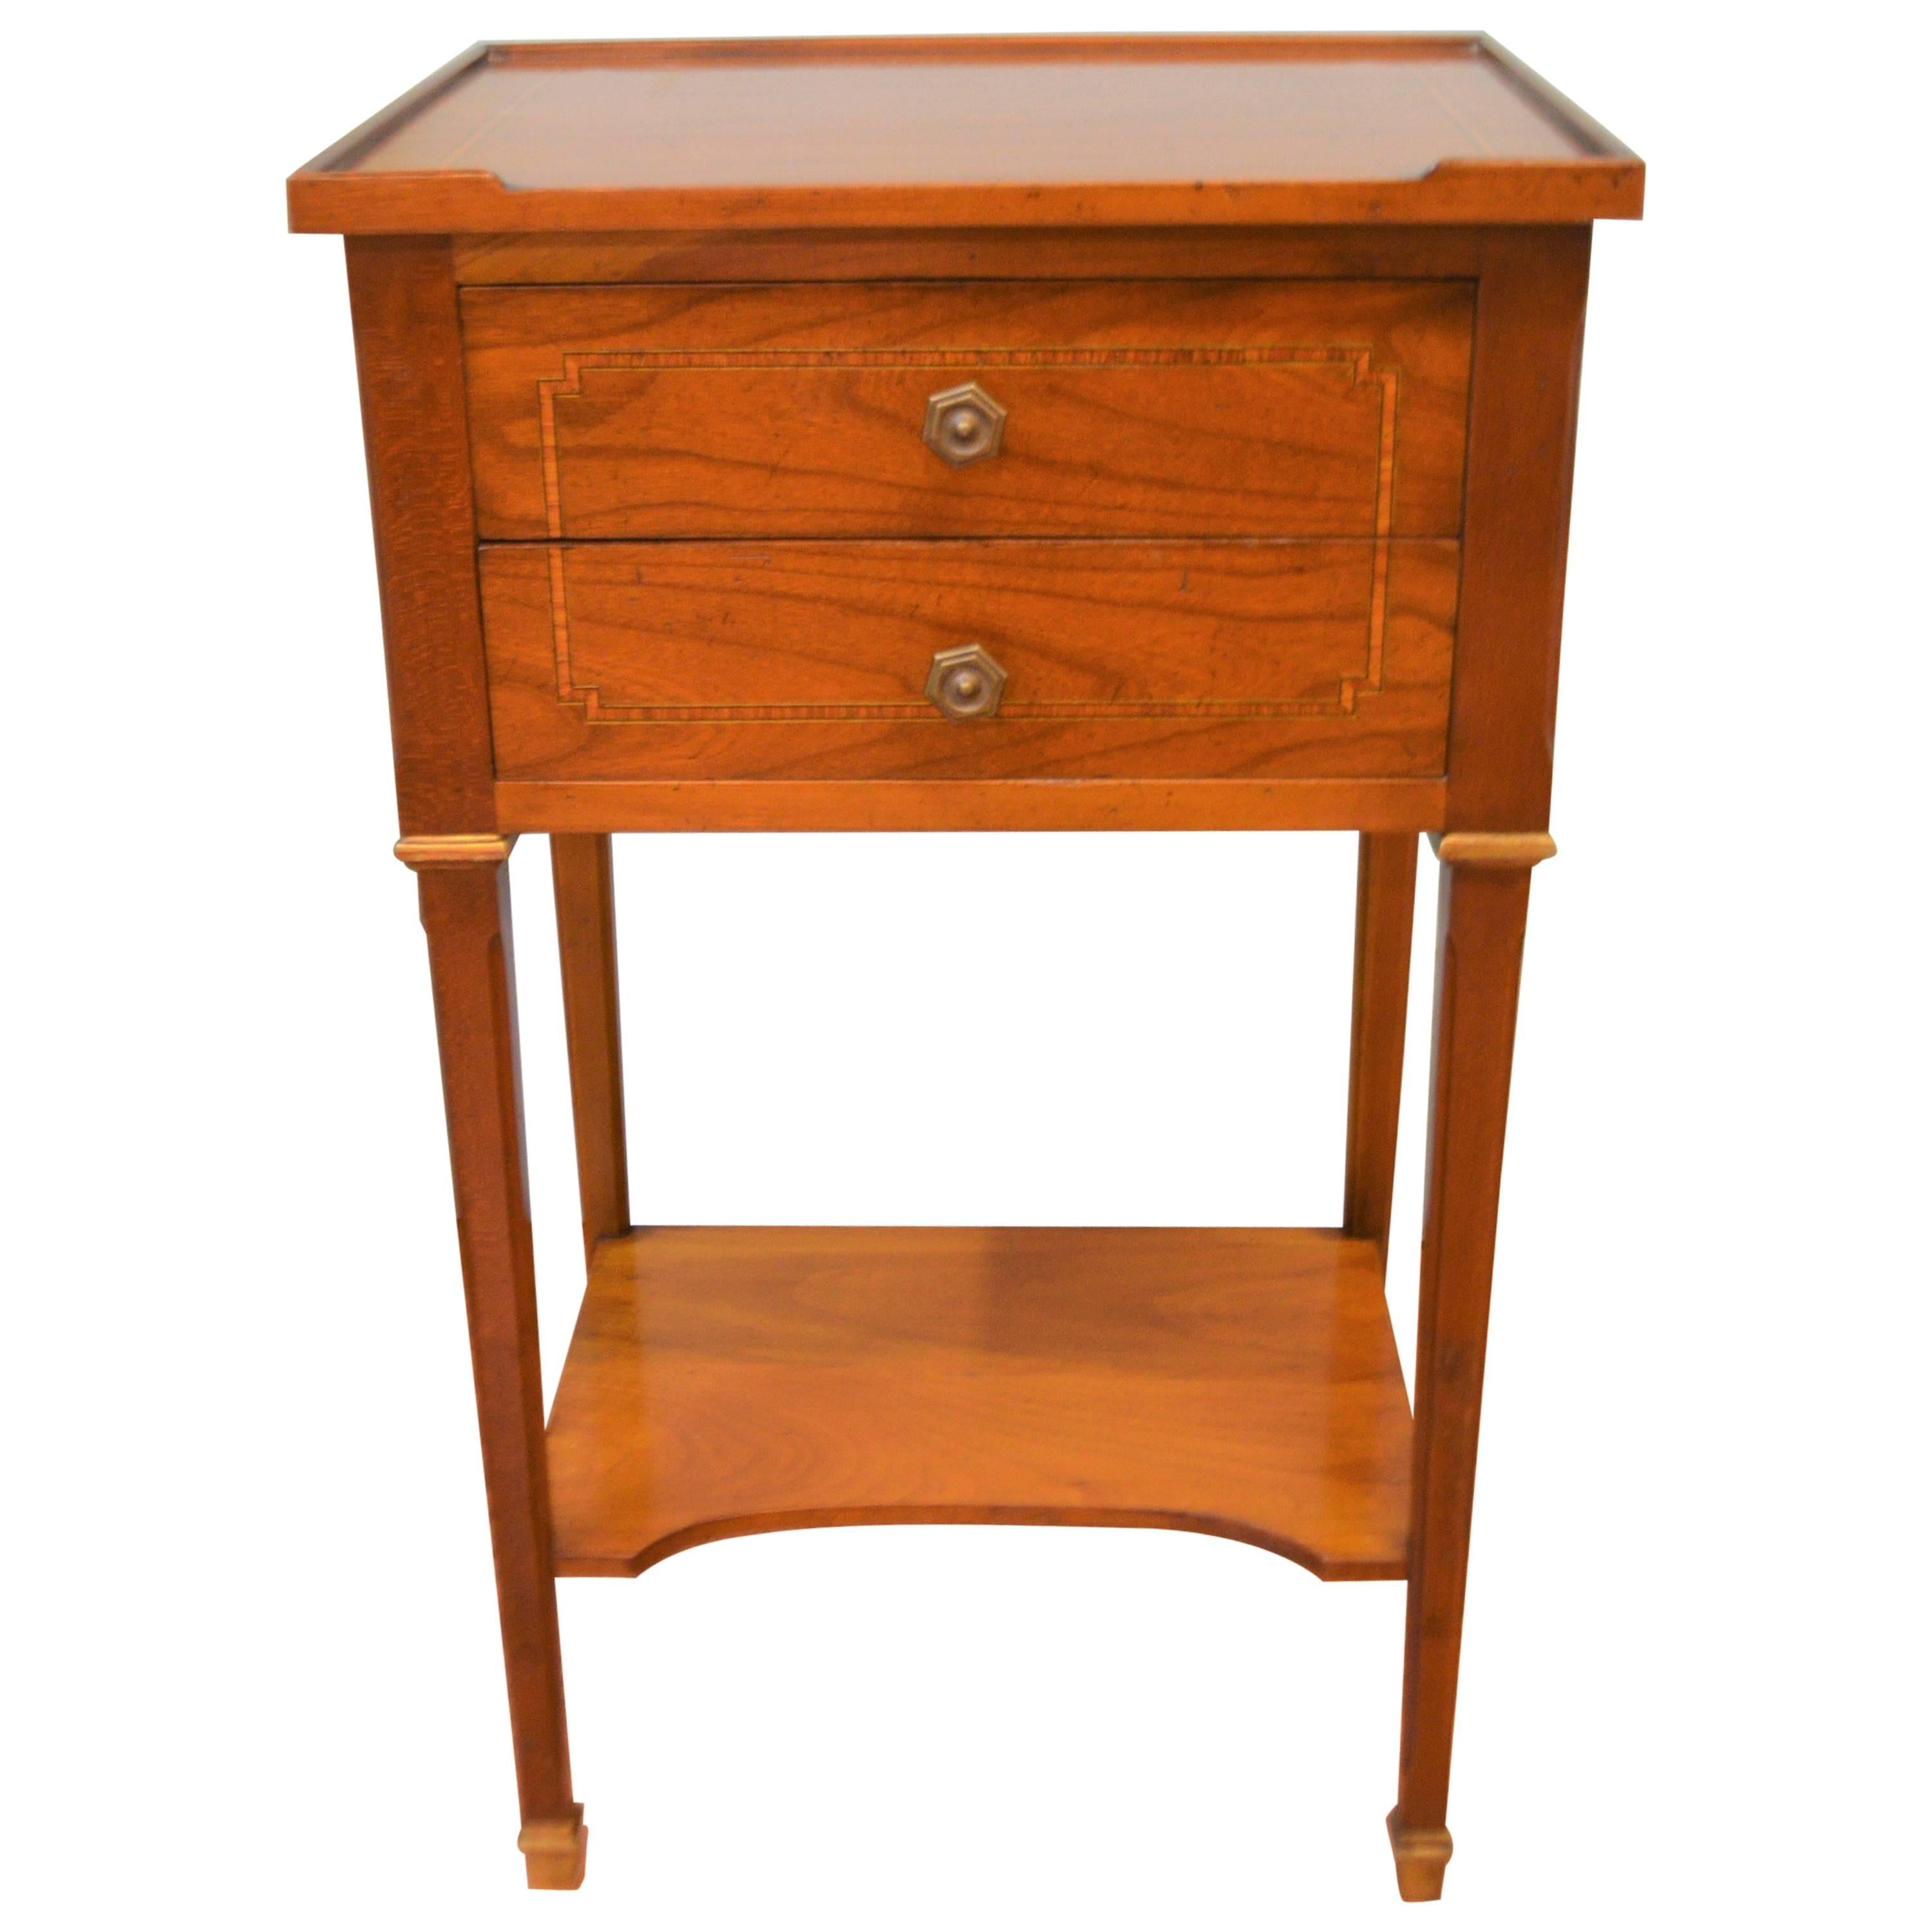 Louis XVI Style Mahogany Side Table with Two Drawers and Bottom Shelf